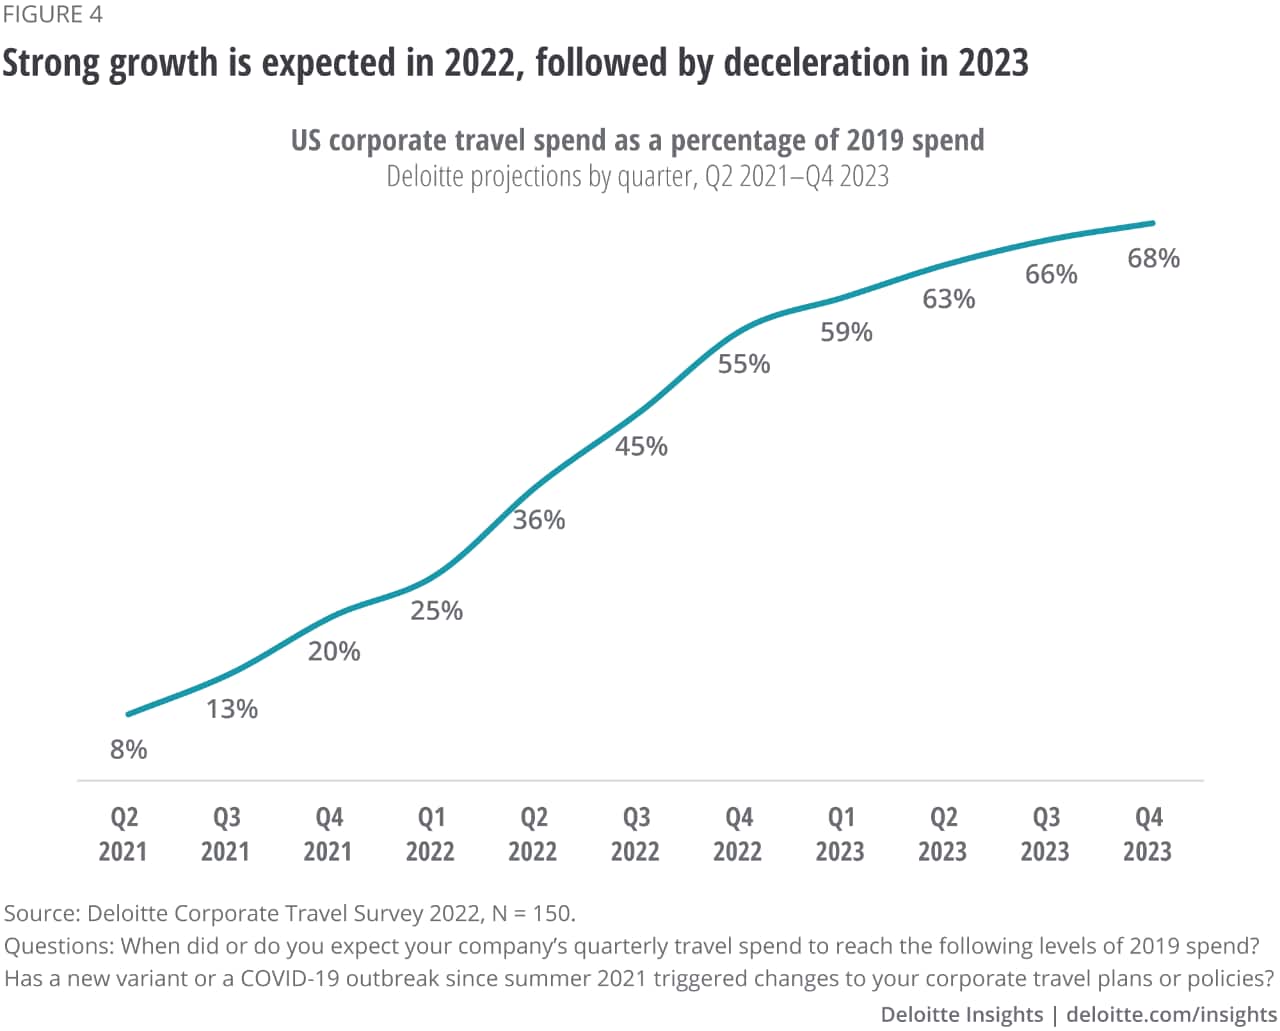 Figure 4. Strong growth is expected in 2022, followed by deceleration in 2023. Corporate travel spend is not expected to recover to prepandemic levels this year or next